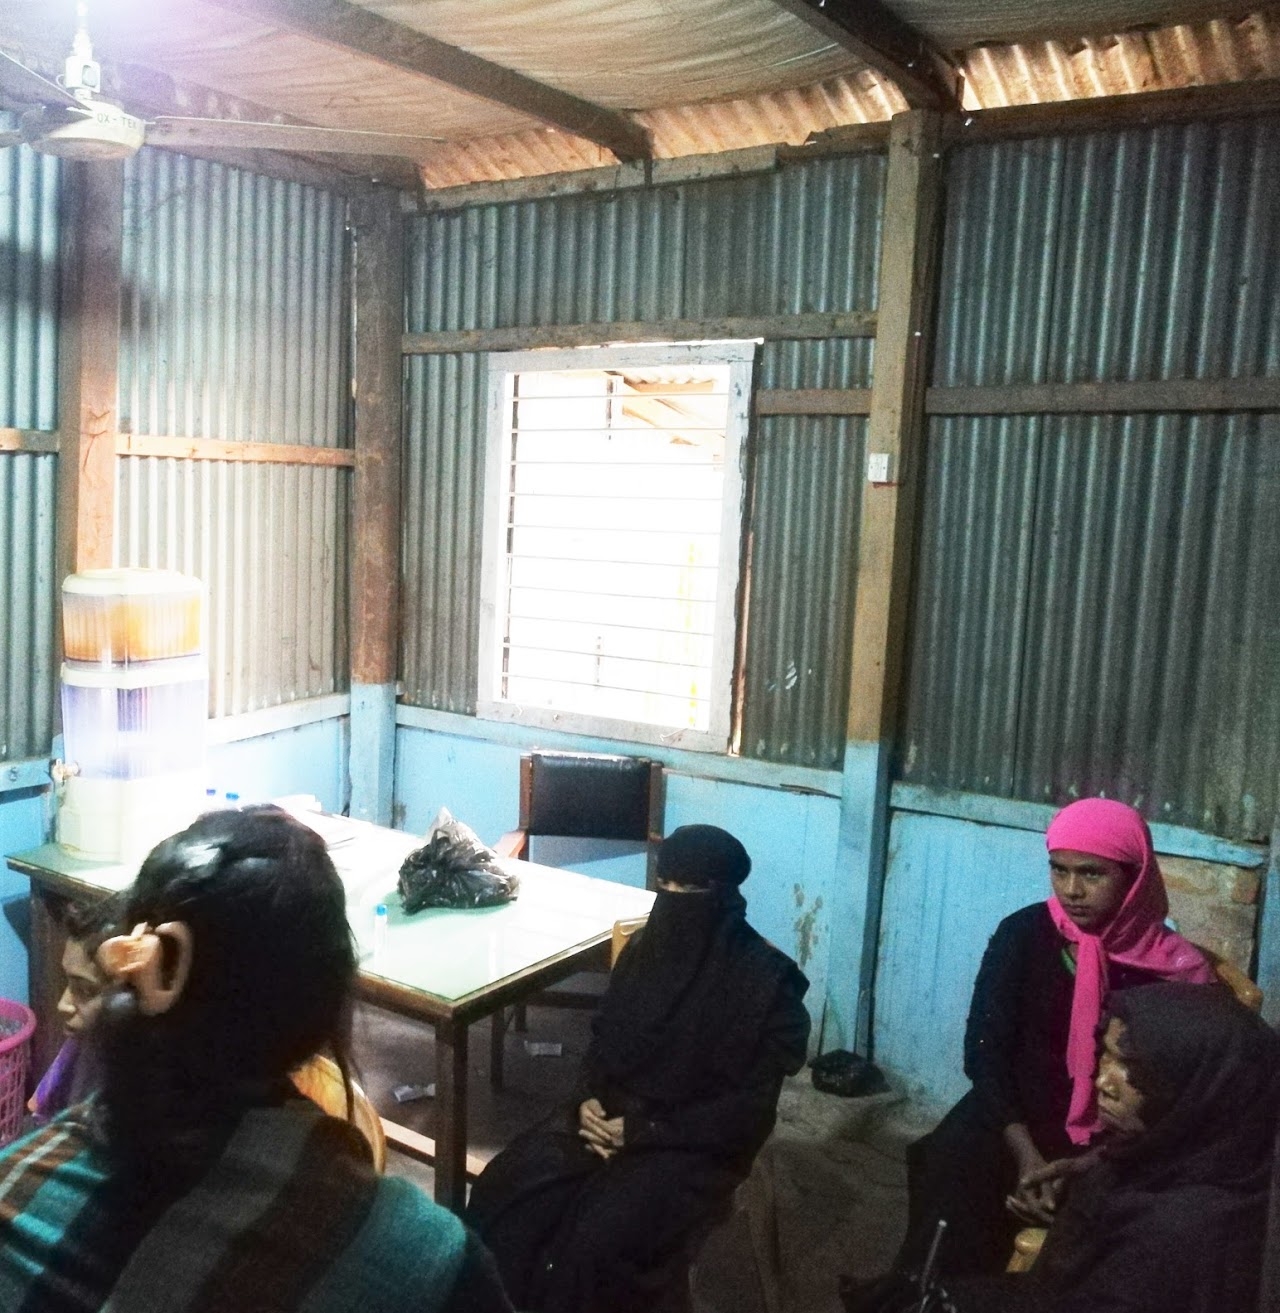 Some female Rohingya refugees are waiting in a room for interview in the camp area